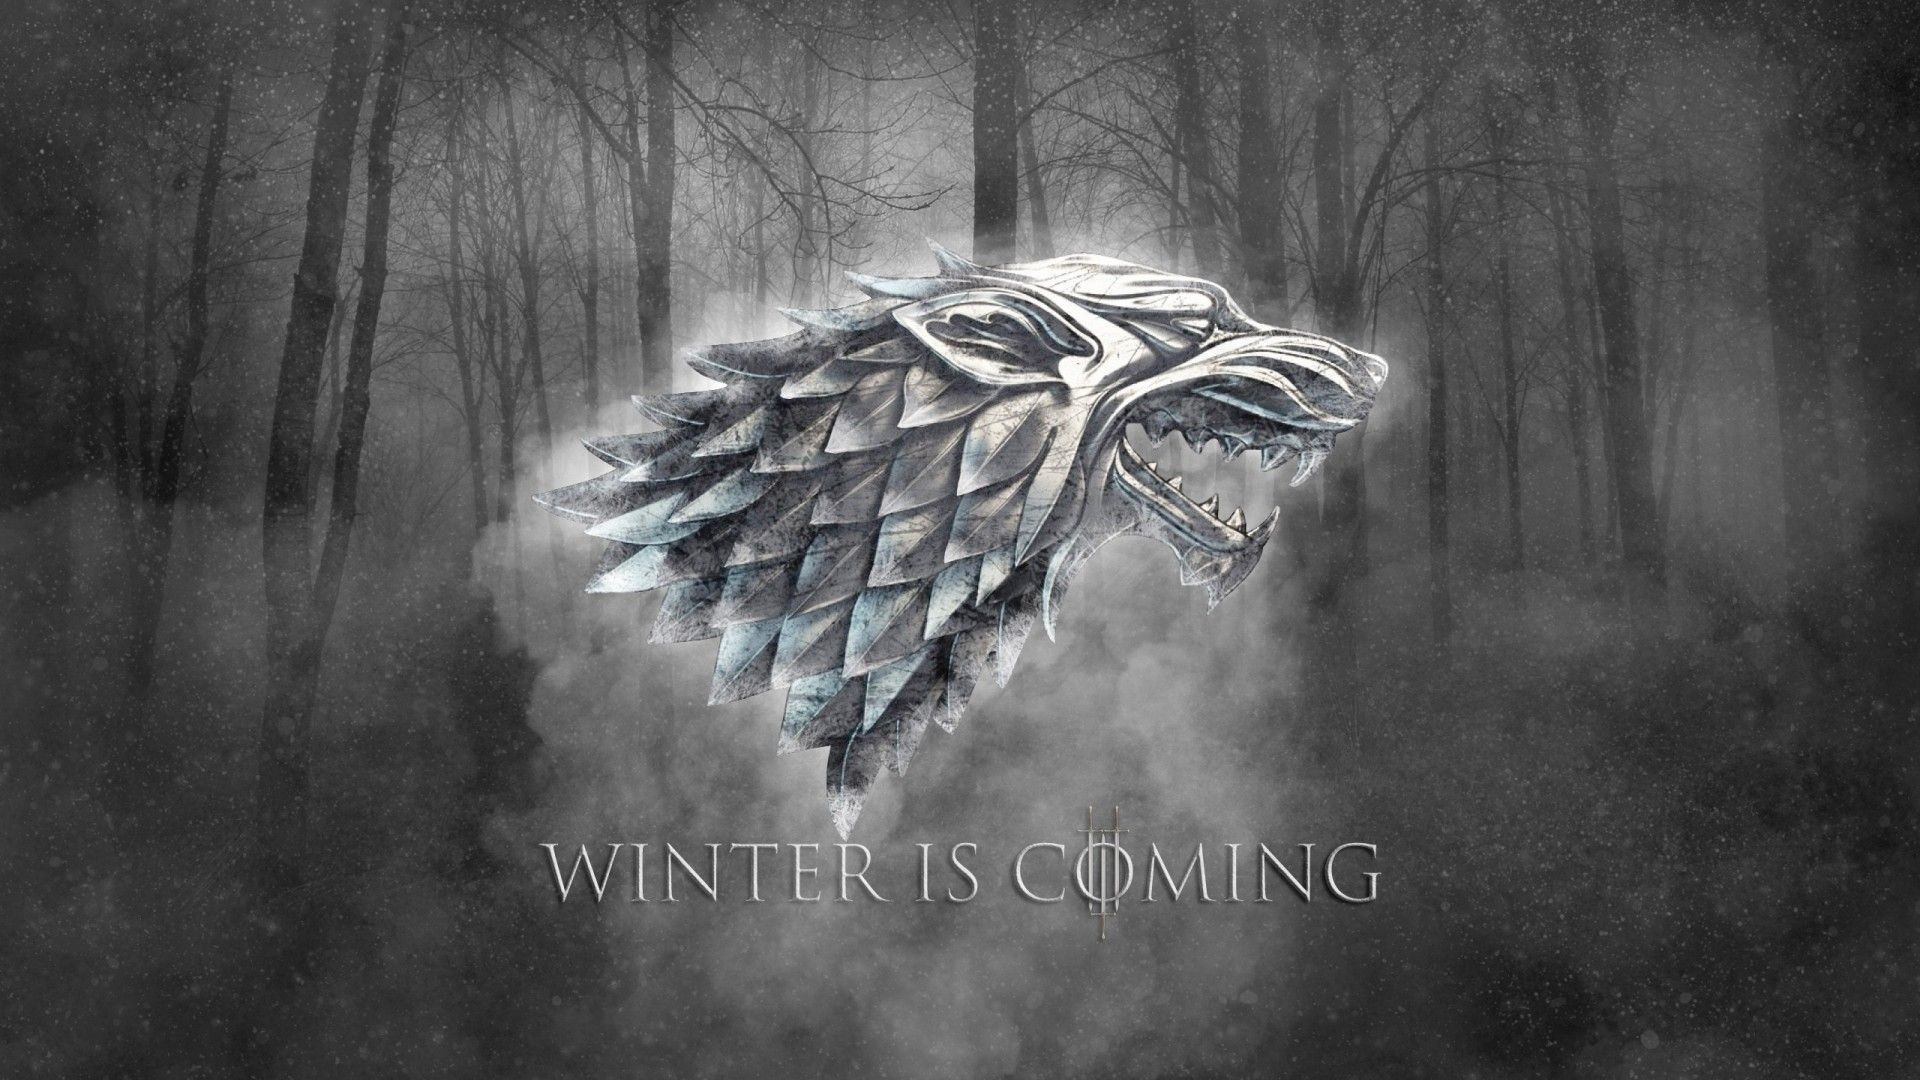 1920x1080 Winter Is Coming Wallpapers - Wallpaper Cave | Free Wallpapers | Pinterest  | Wallpaper